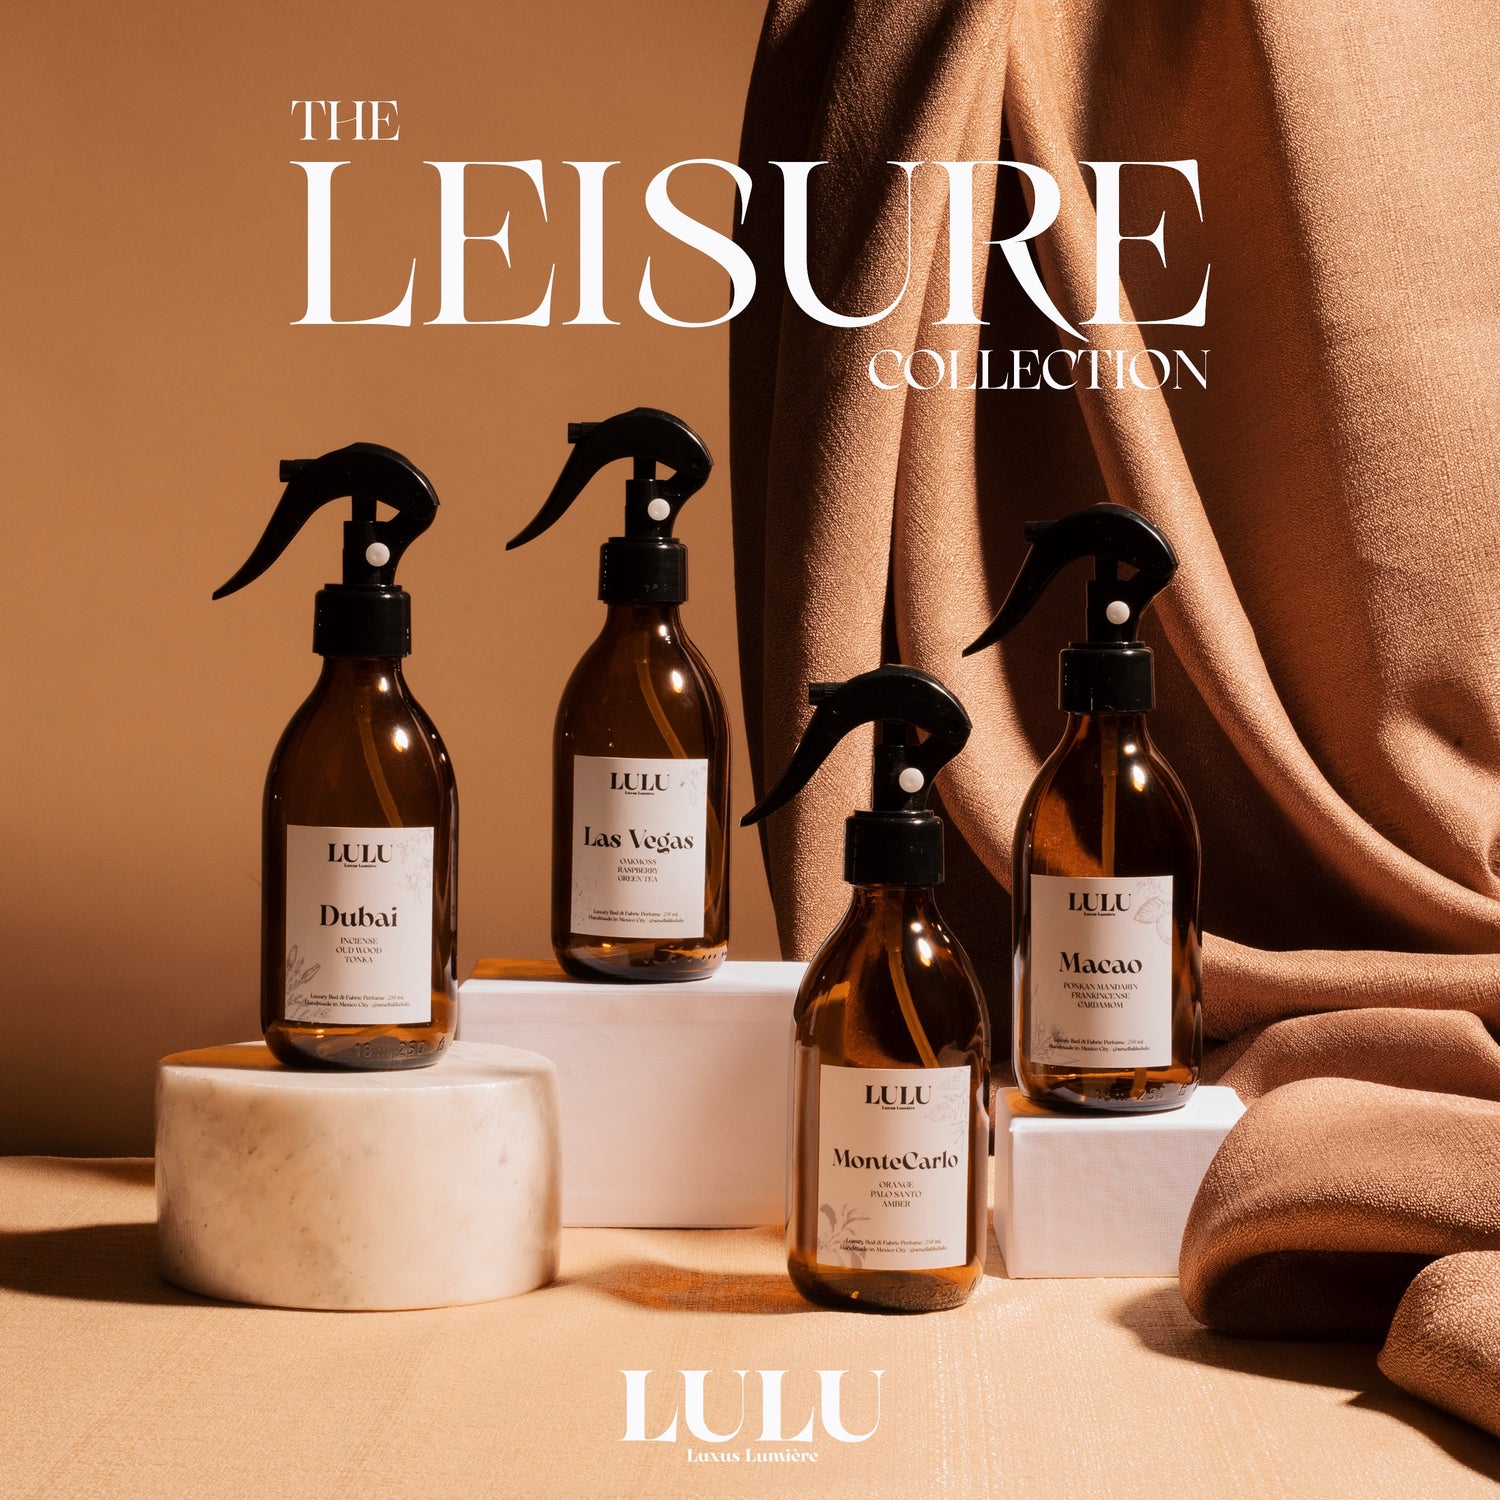 The "Leisure" Collection